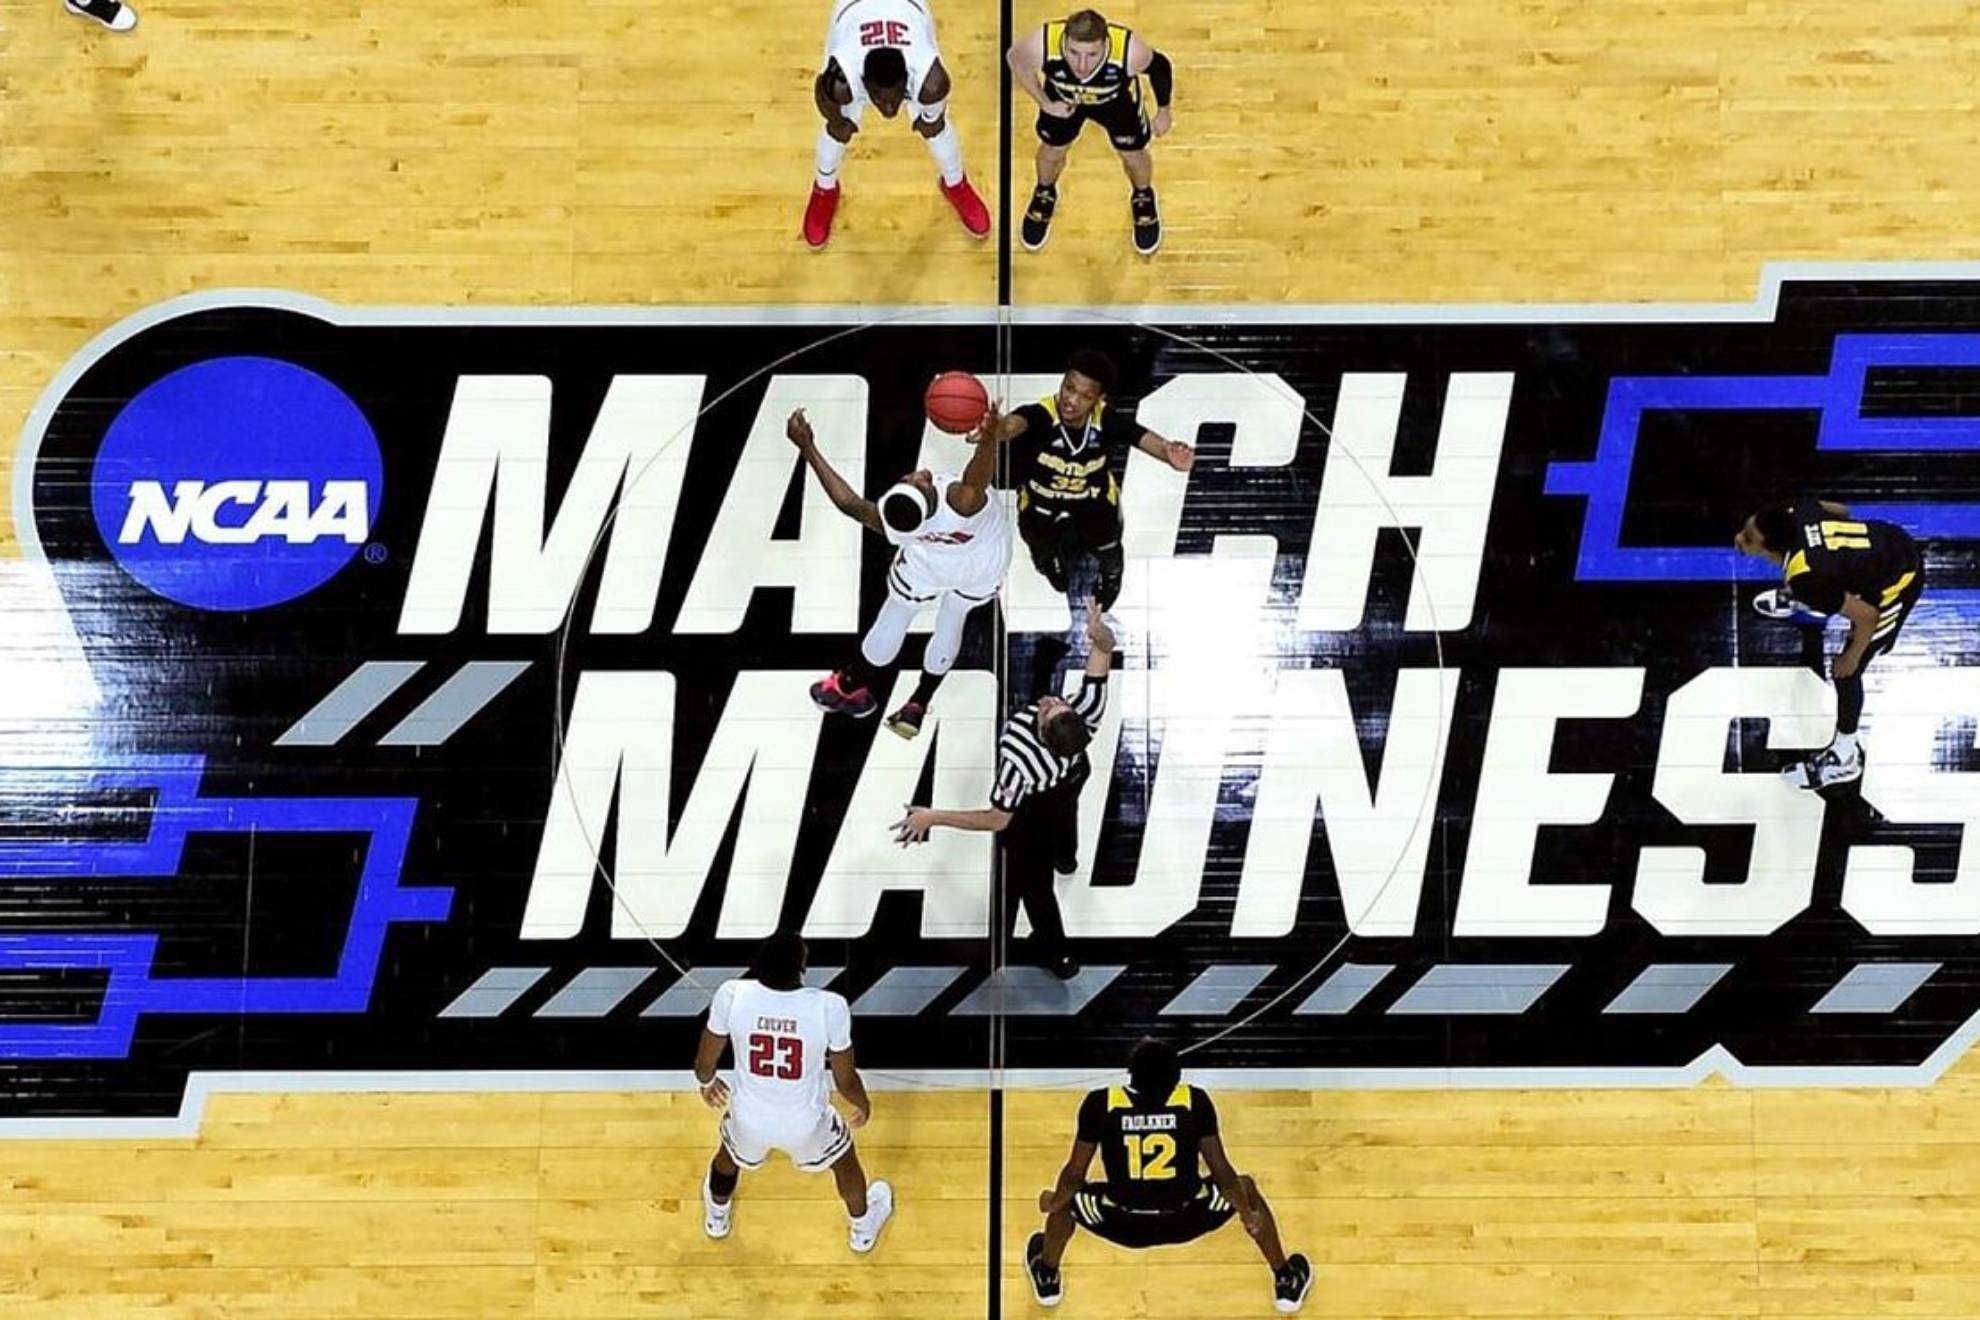 Lowest ranked team to win March Madness: What is the lowest seed to win March Madness?